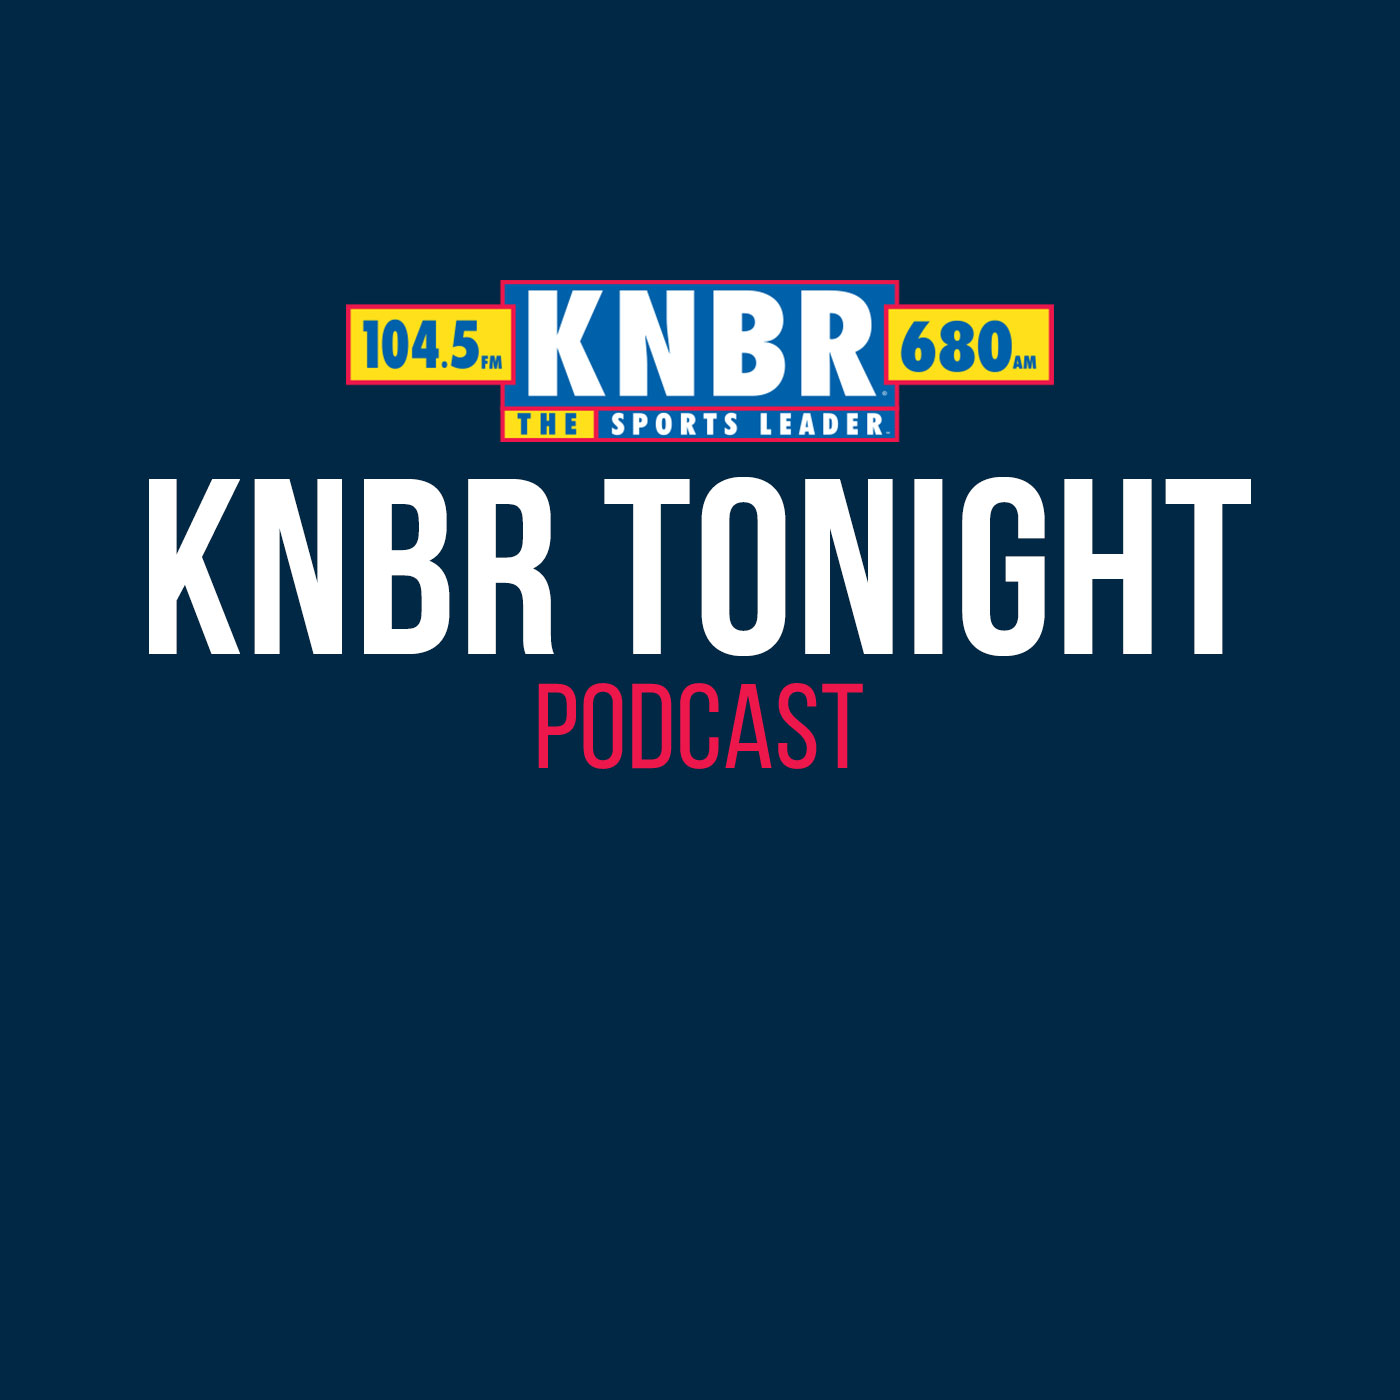 10-28 Janie McCauley joins KNBR Tonight with CG to talk about her story on Hall of Famer Gary Payton, Warriors, the breaking news: Bob Melvin joining the Padres and her emotional foul ball story